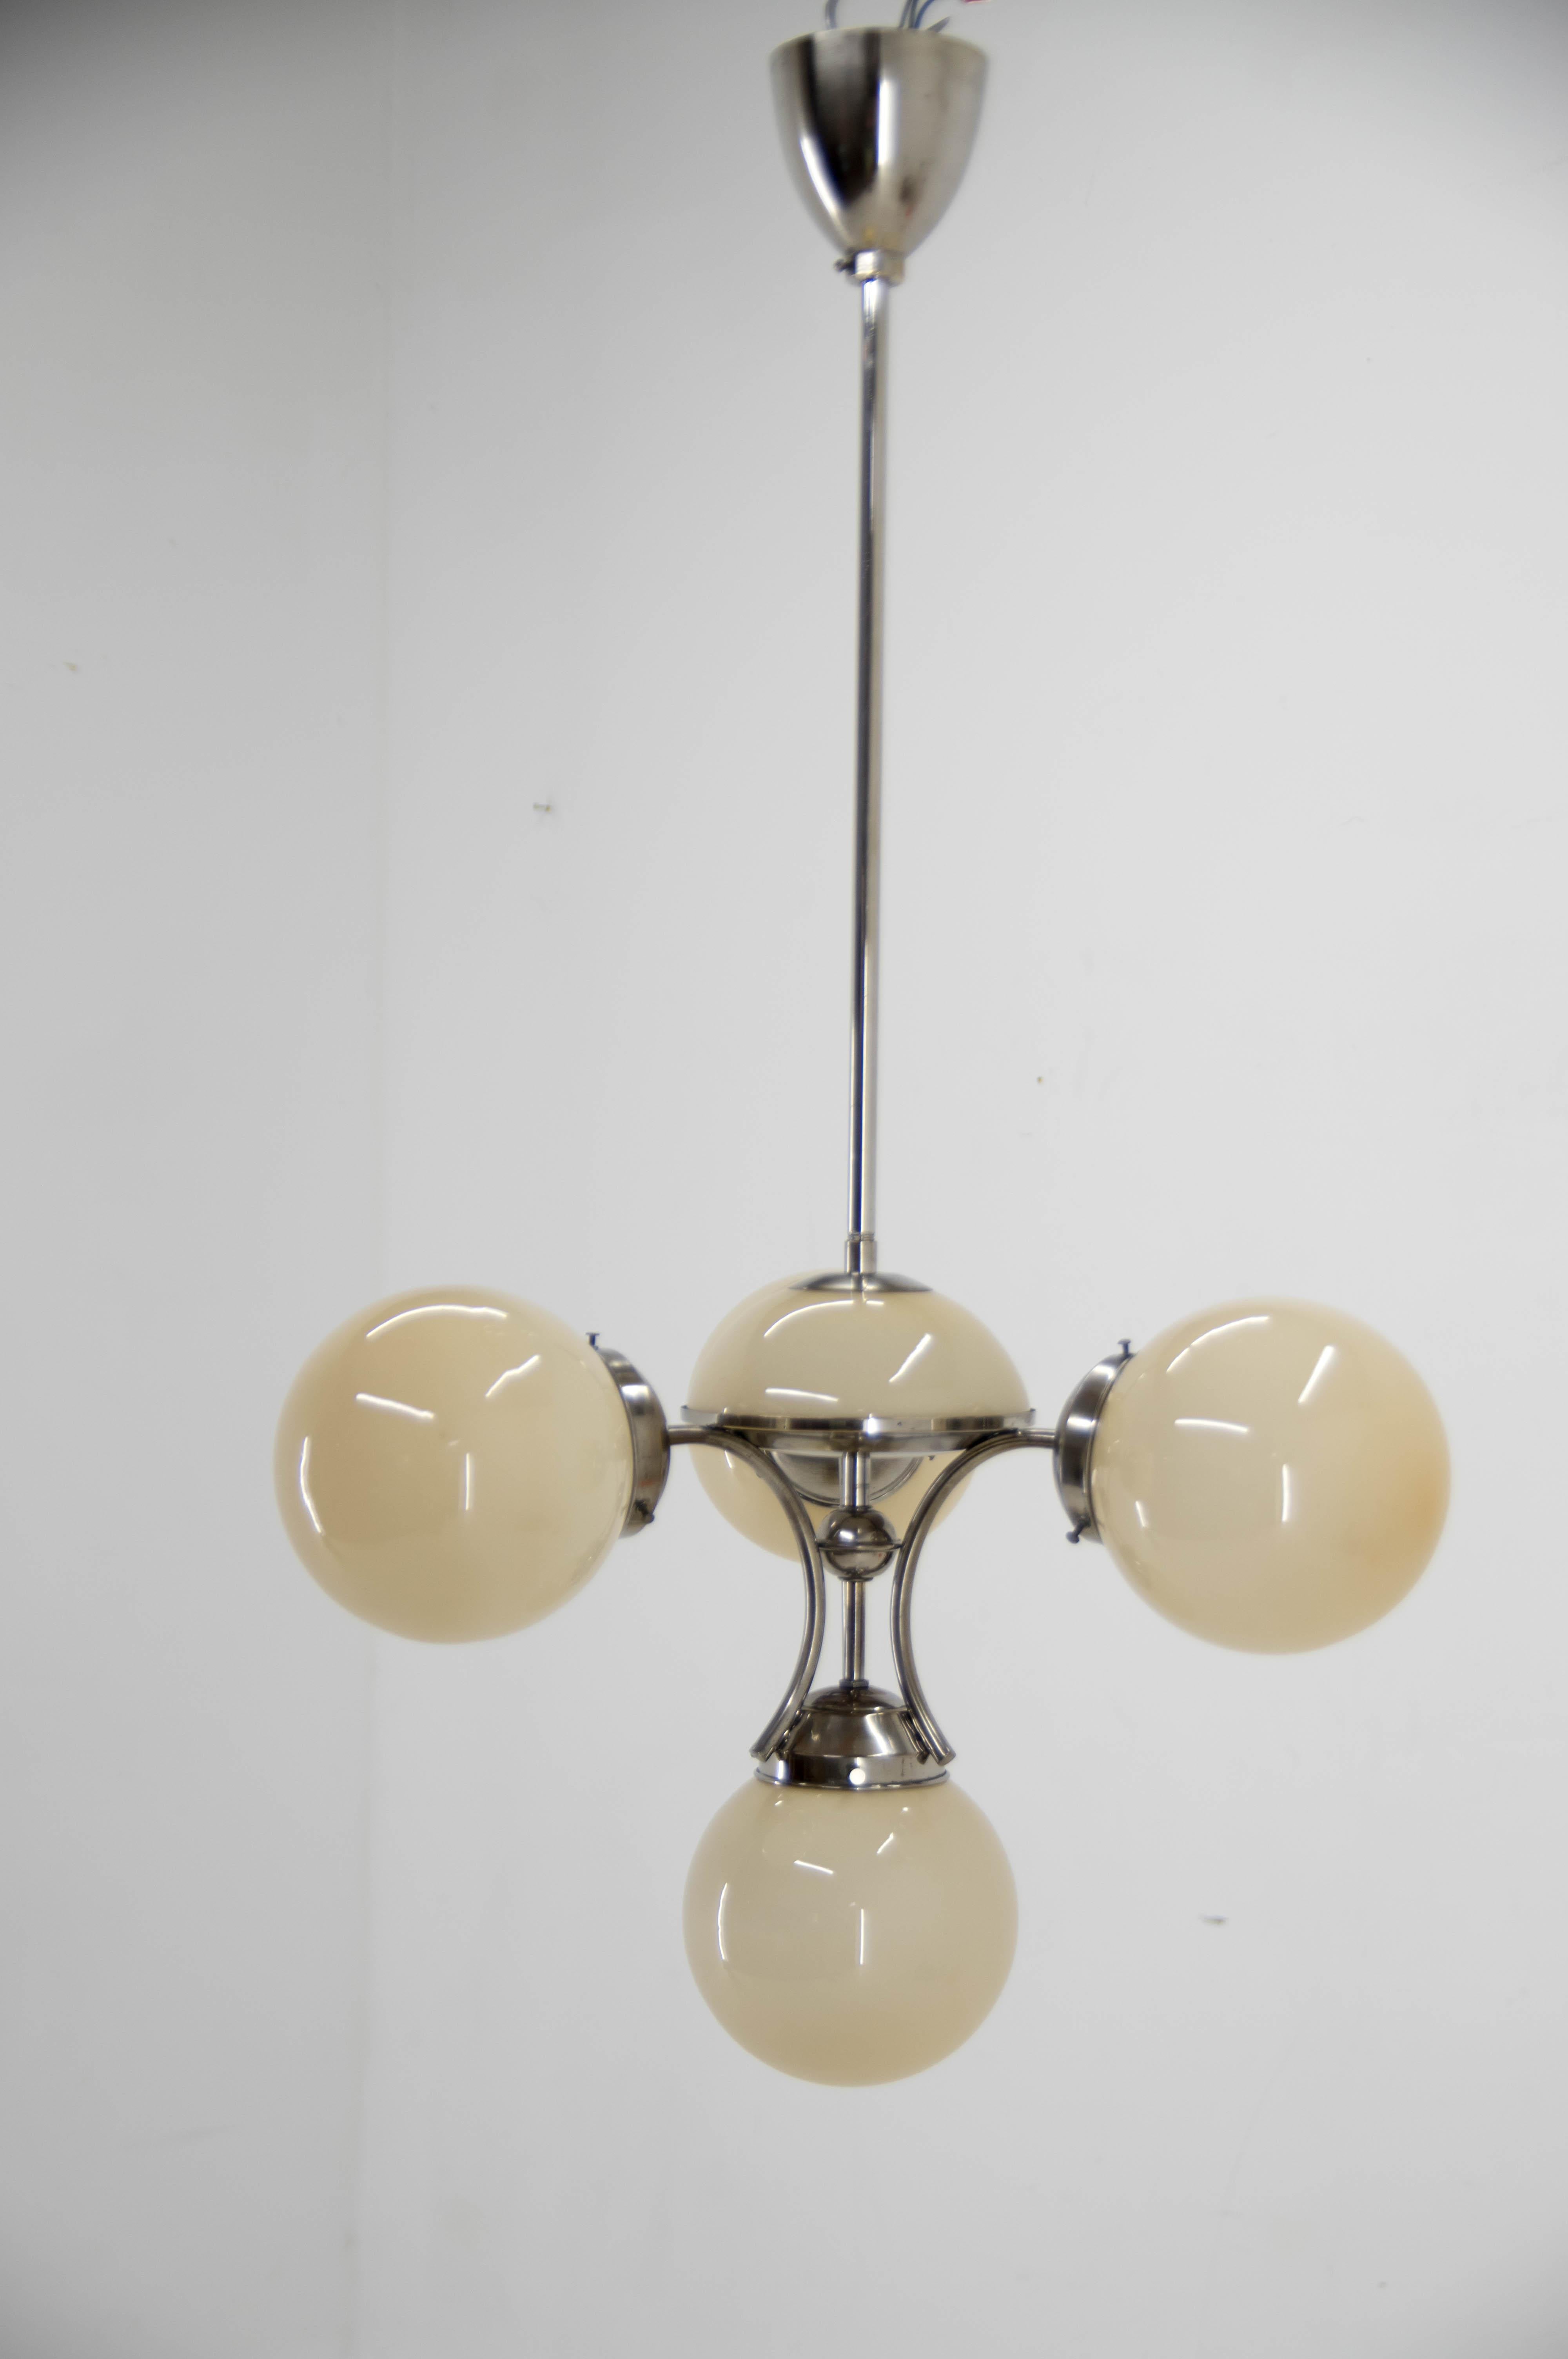 Unique Art Deco Nickel and Glass Chandelier, 1930s For Sale 2